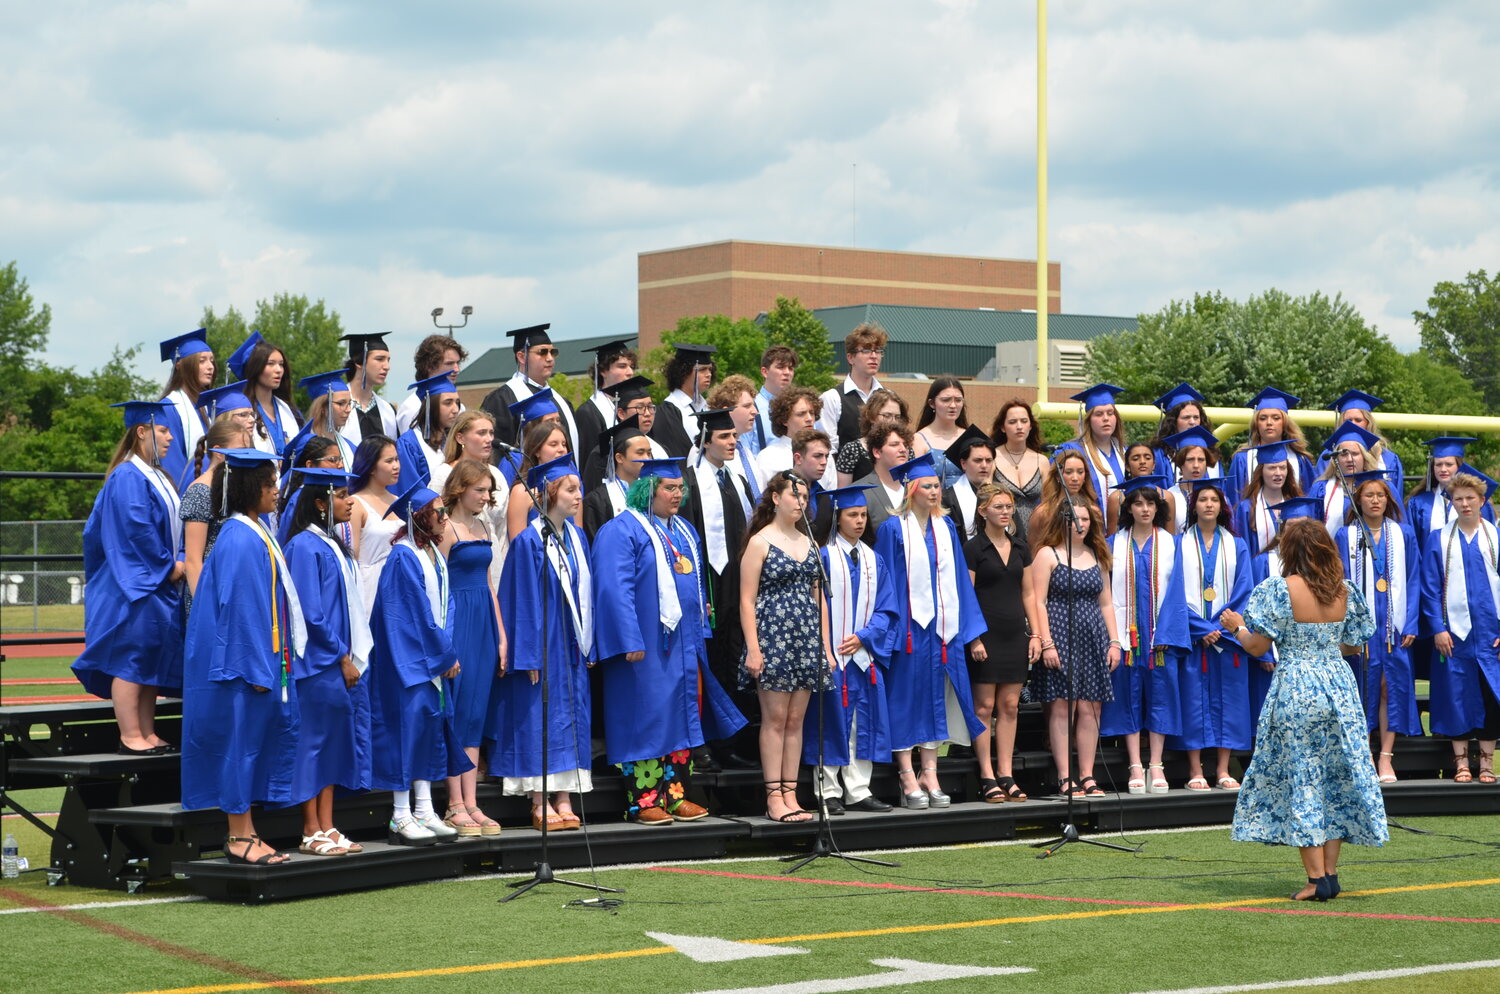 The choir at Central Bucks South performs during the June 14 graduation ceremony.